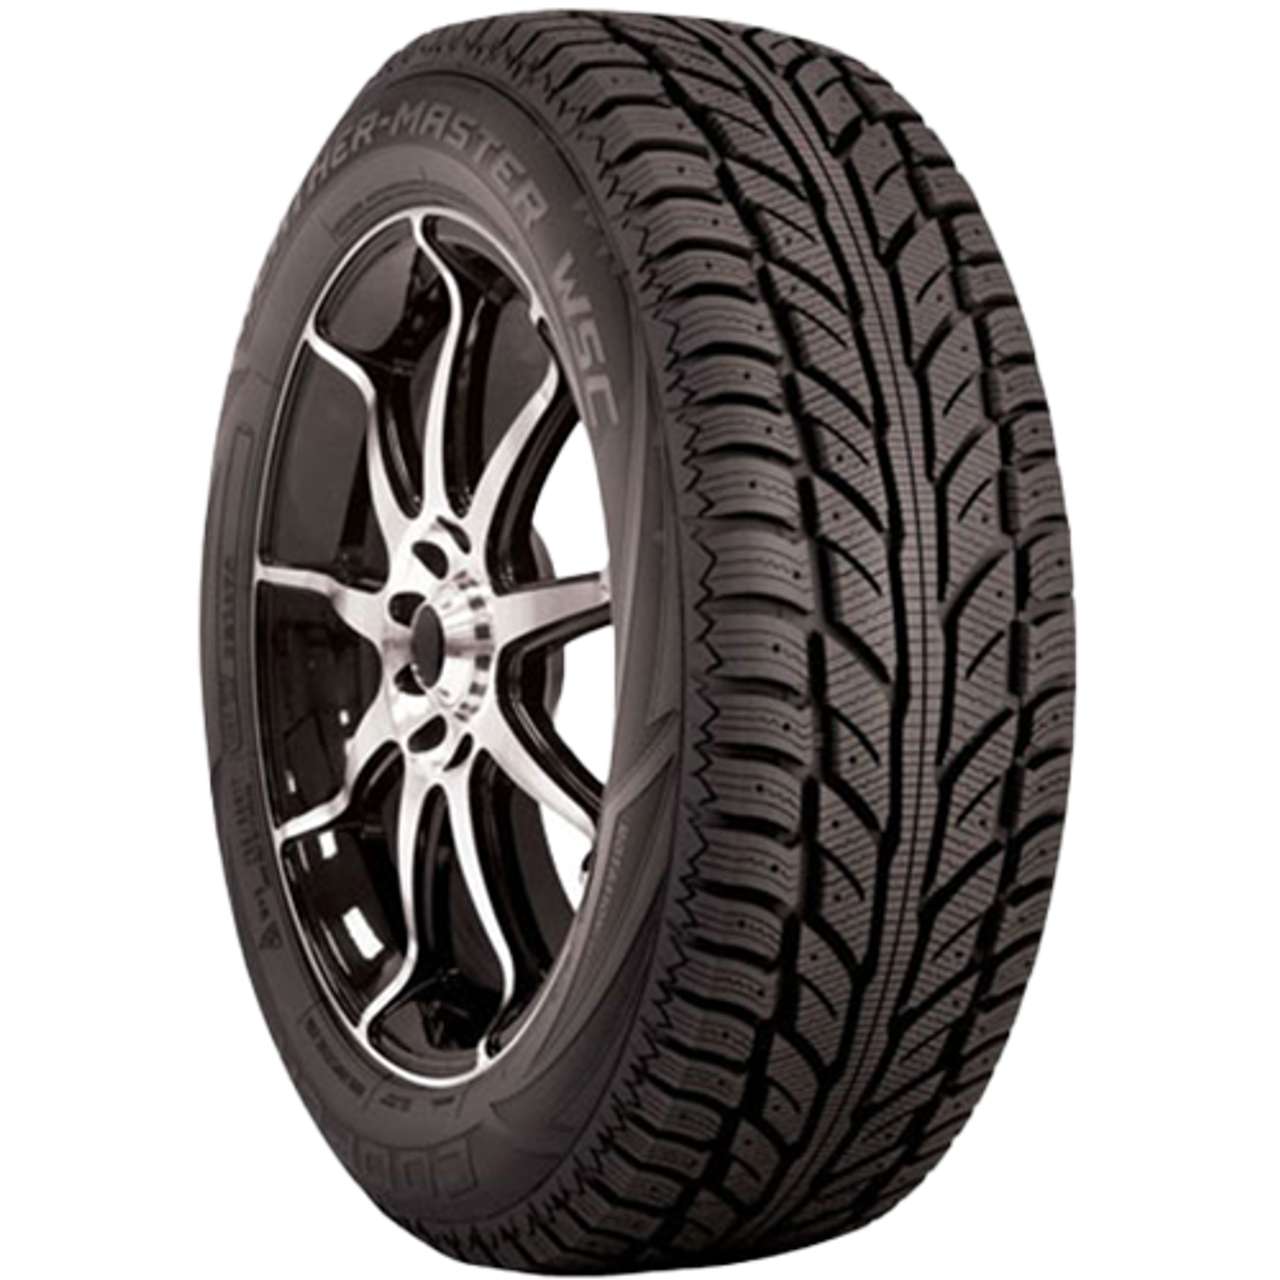 COOPER WEATHERMASTER WSC 245/50R20 102T STUDDABLE BSW